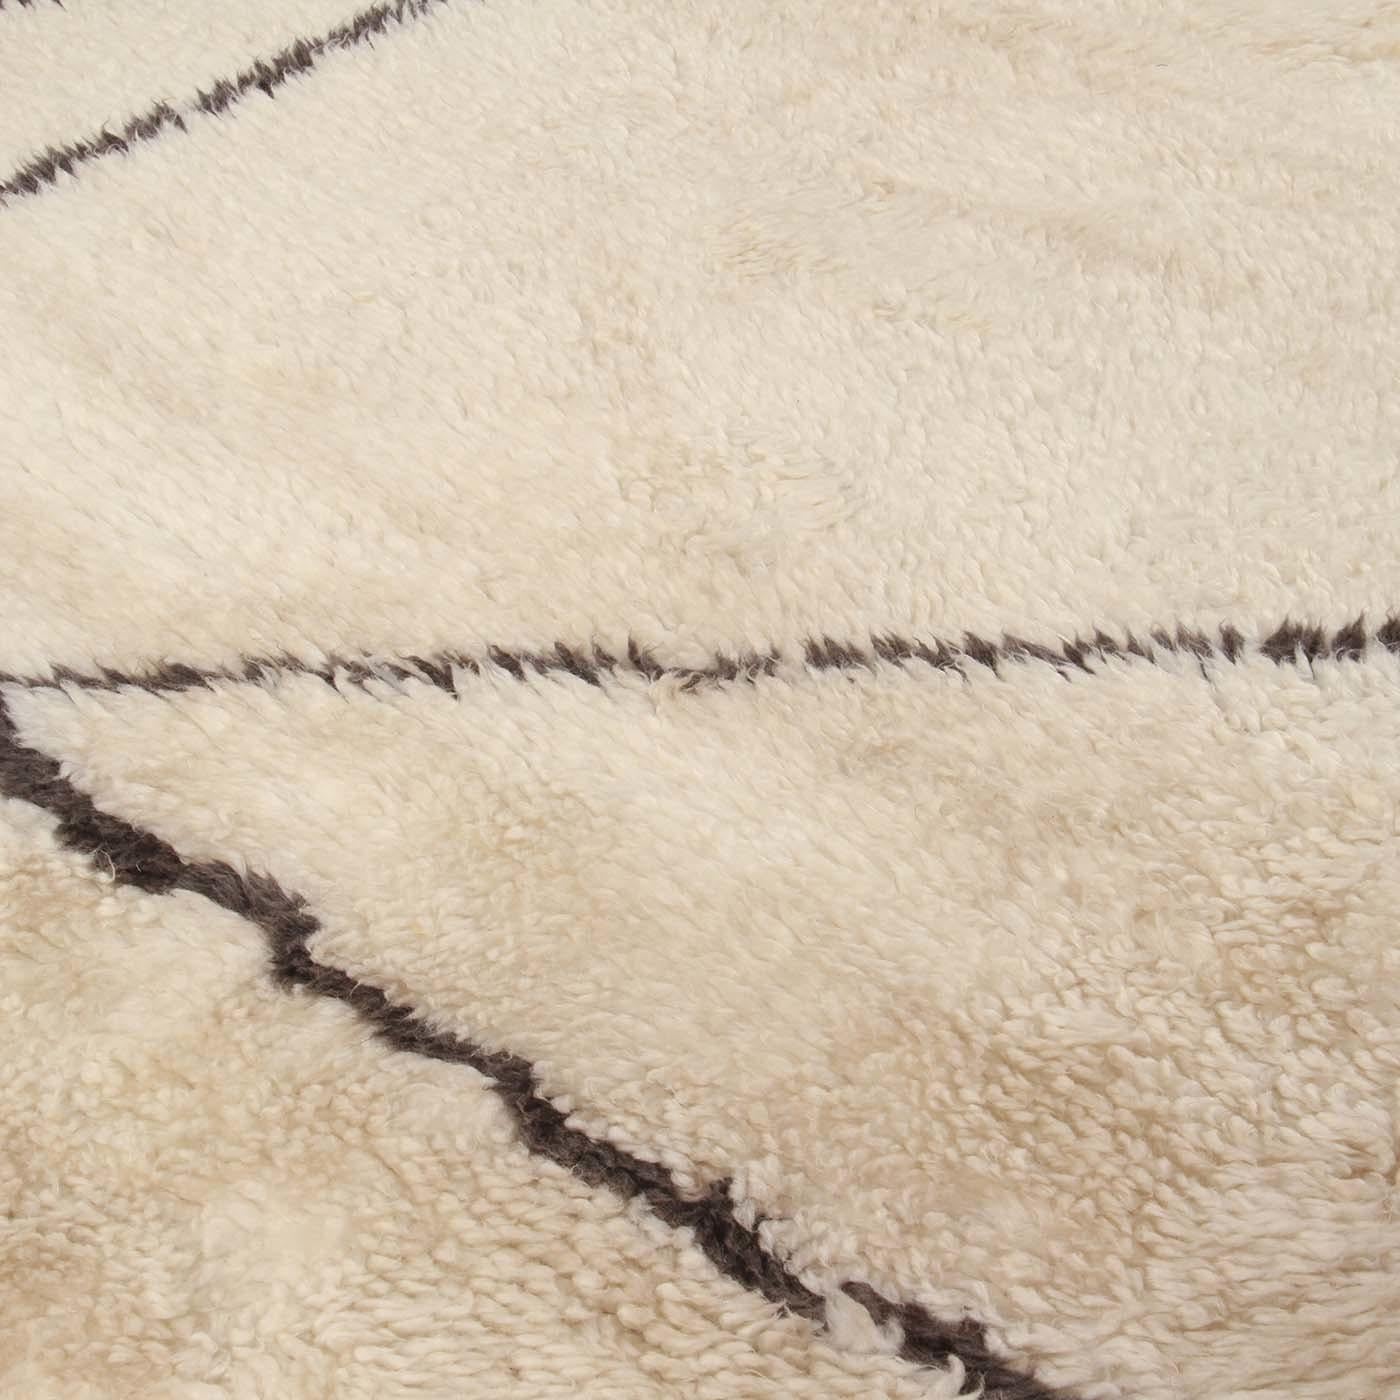 Part of the Moroccan Touch collection, this carpet features incredible attention to detail thanks to the intricacy of the weave of wool and mohair. The incredible craftsmanship is achieved through the use of sun-dried wool that grants a unique sheen